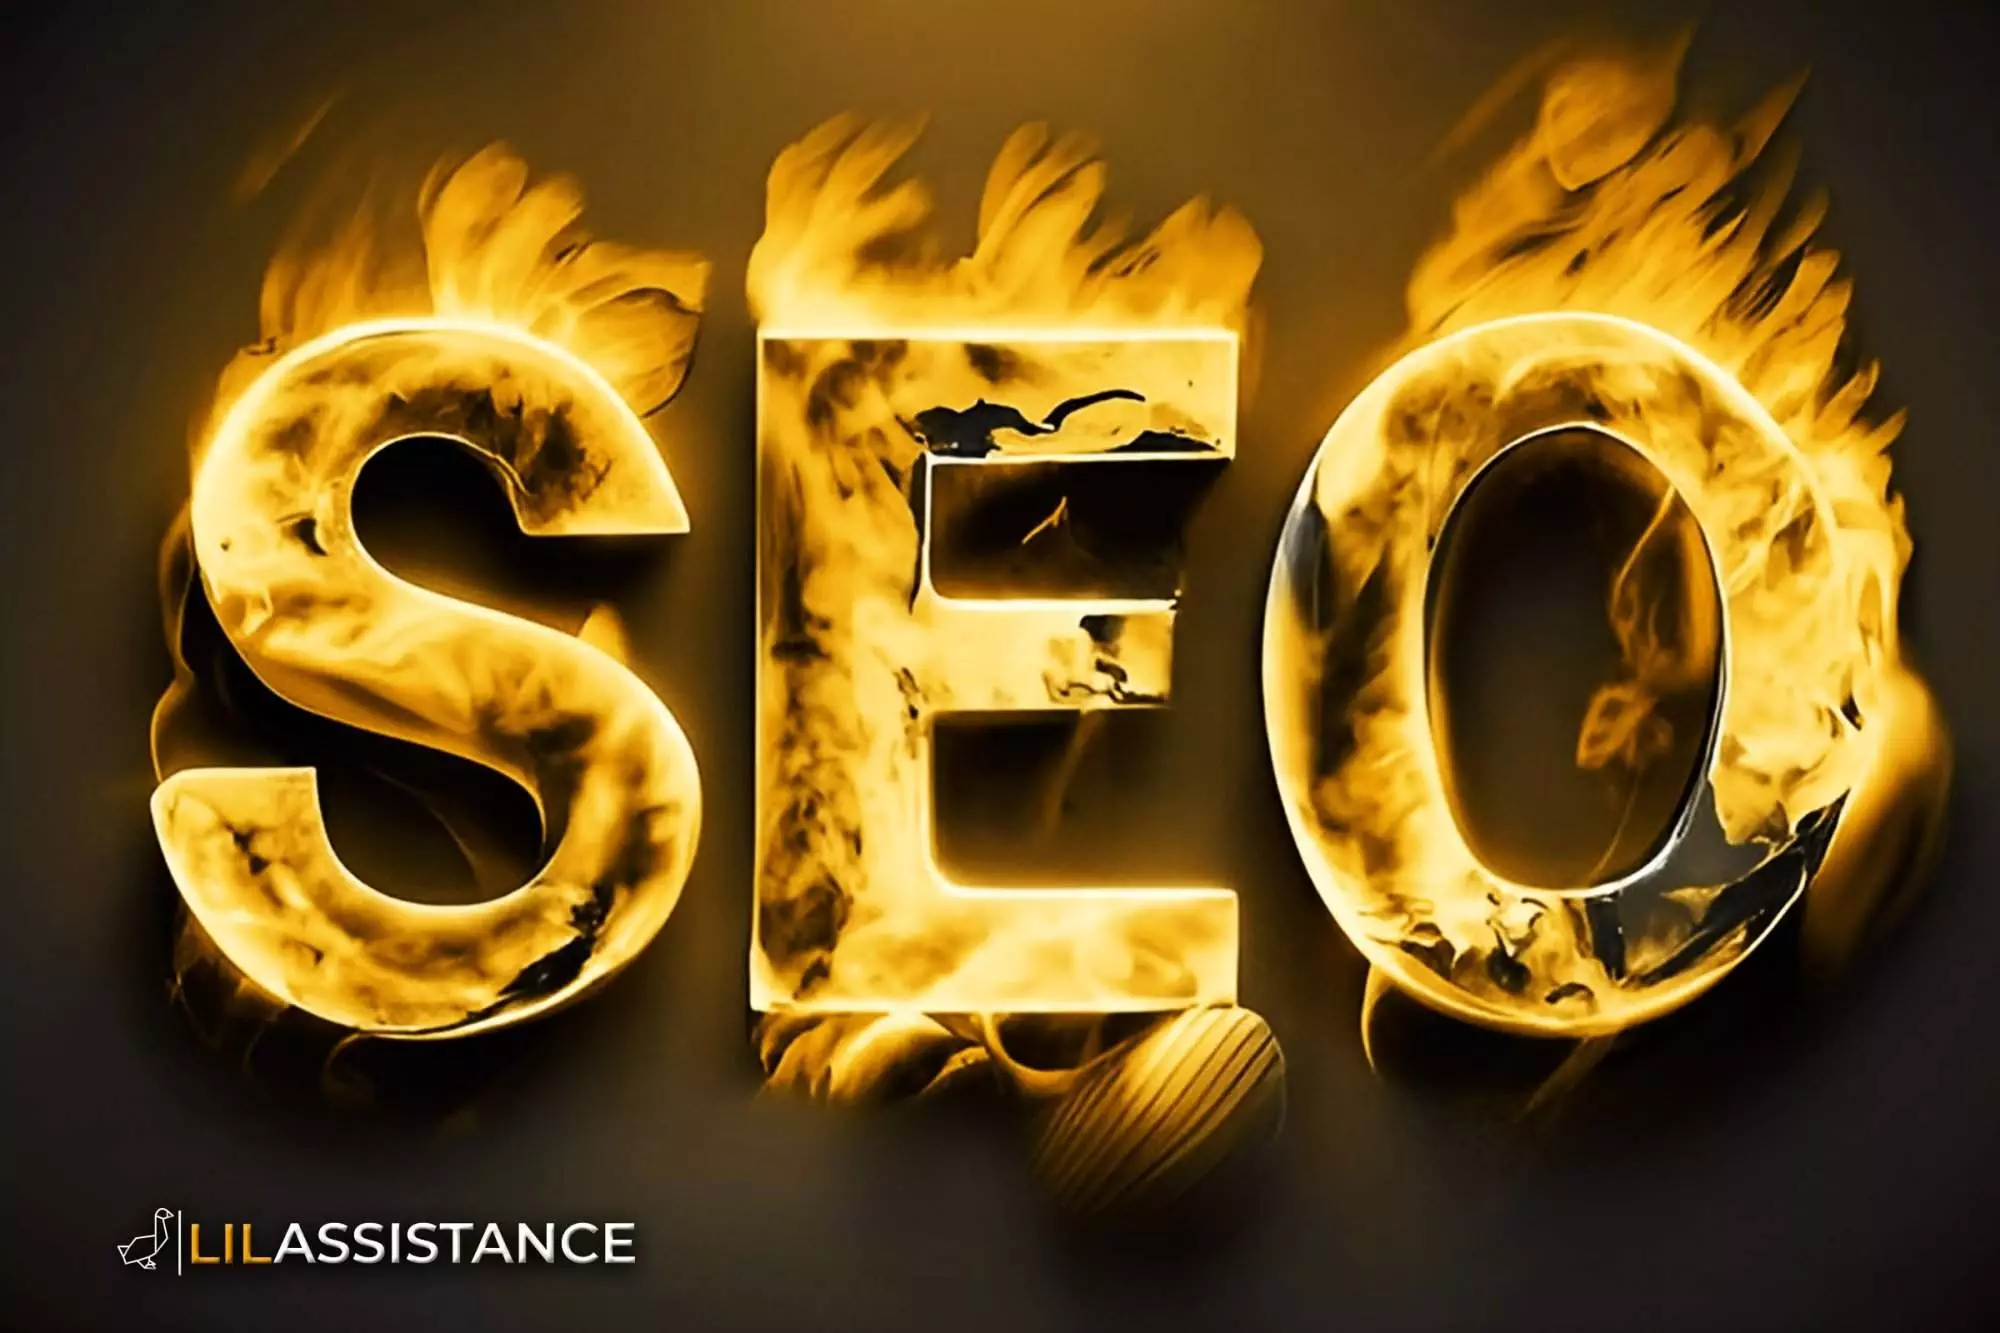 Fiery SEO text with flames in the background and LilAssistance logo.